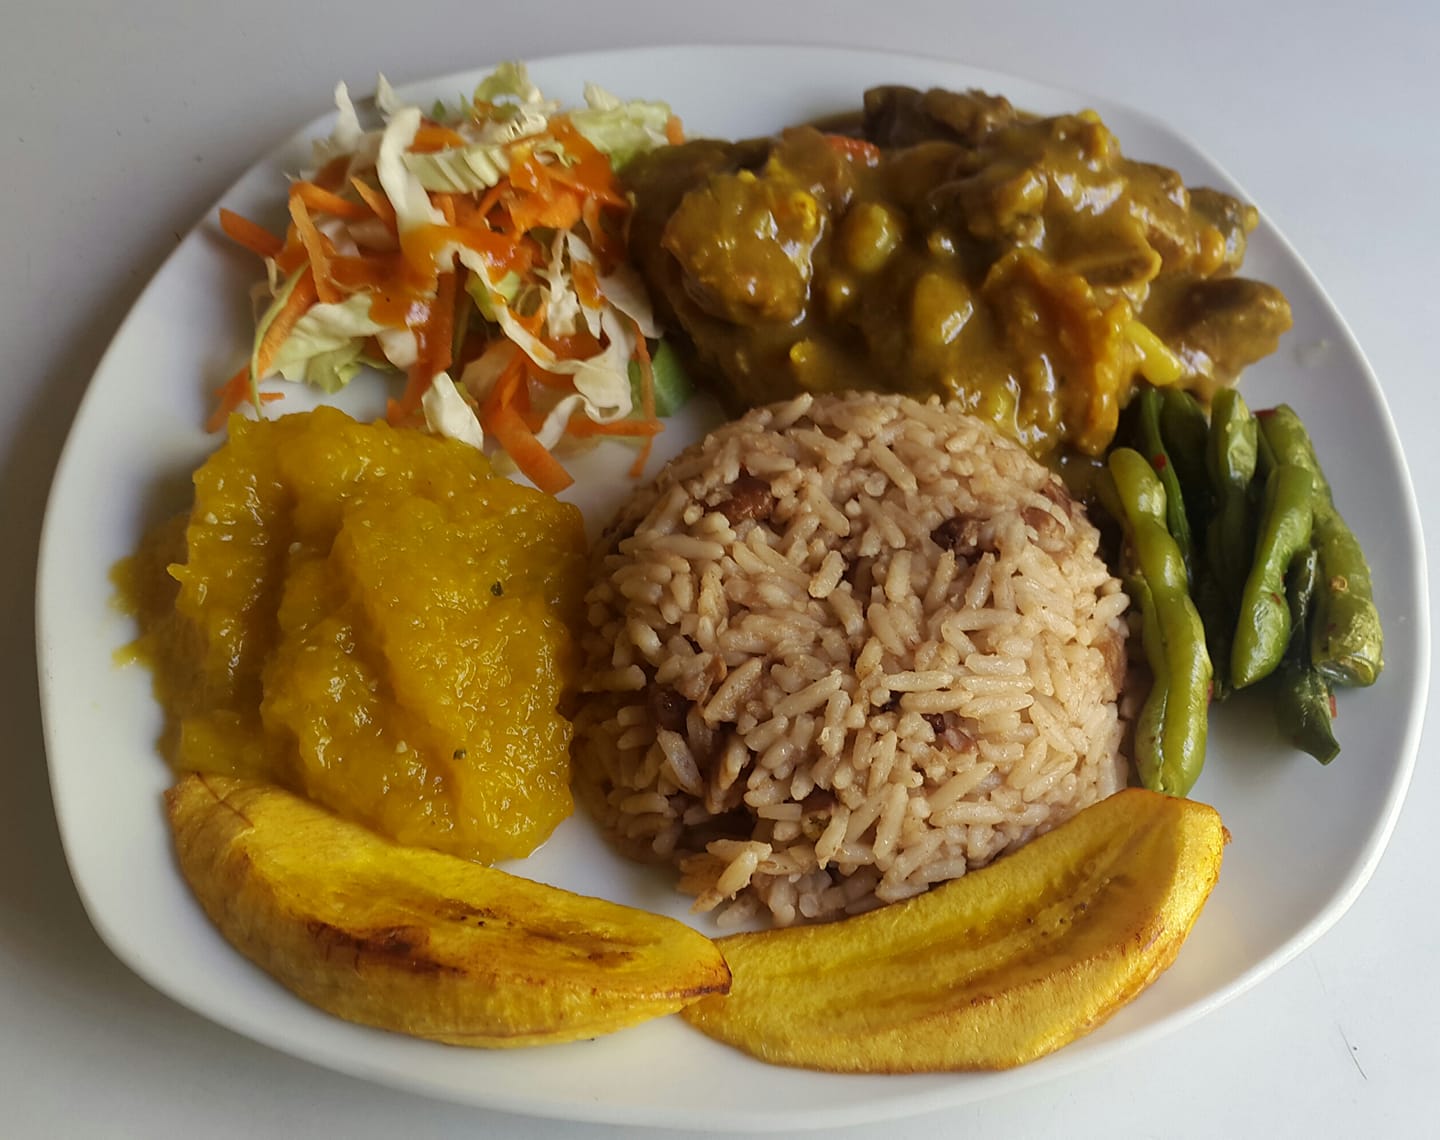 Best Popular Foods & Drinks to try on Vacation in Grenada